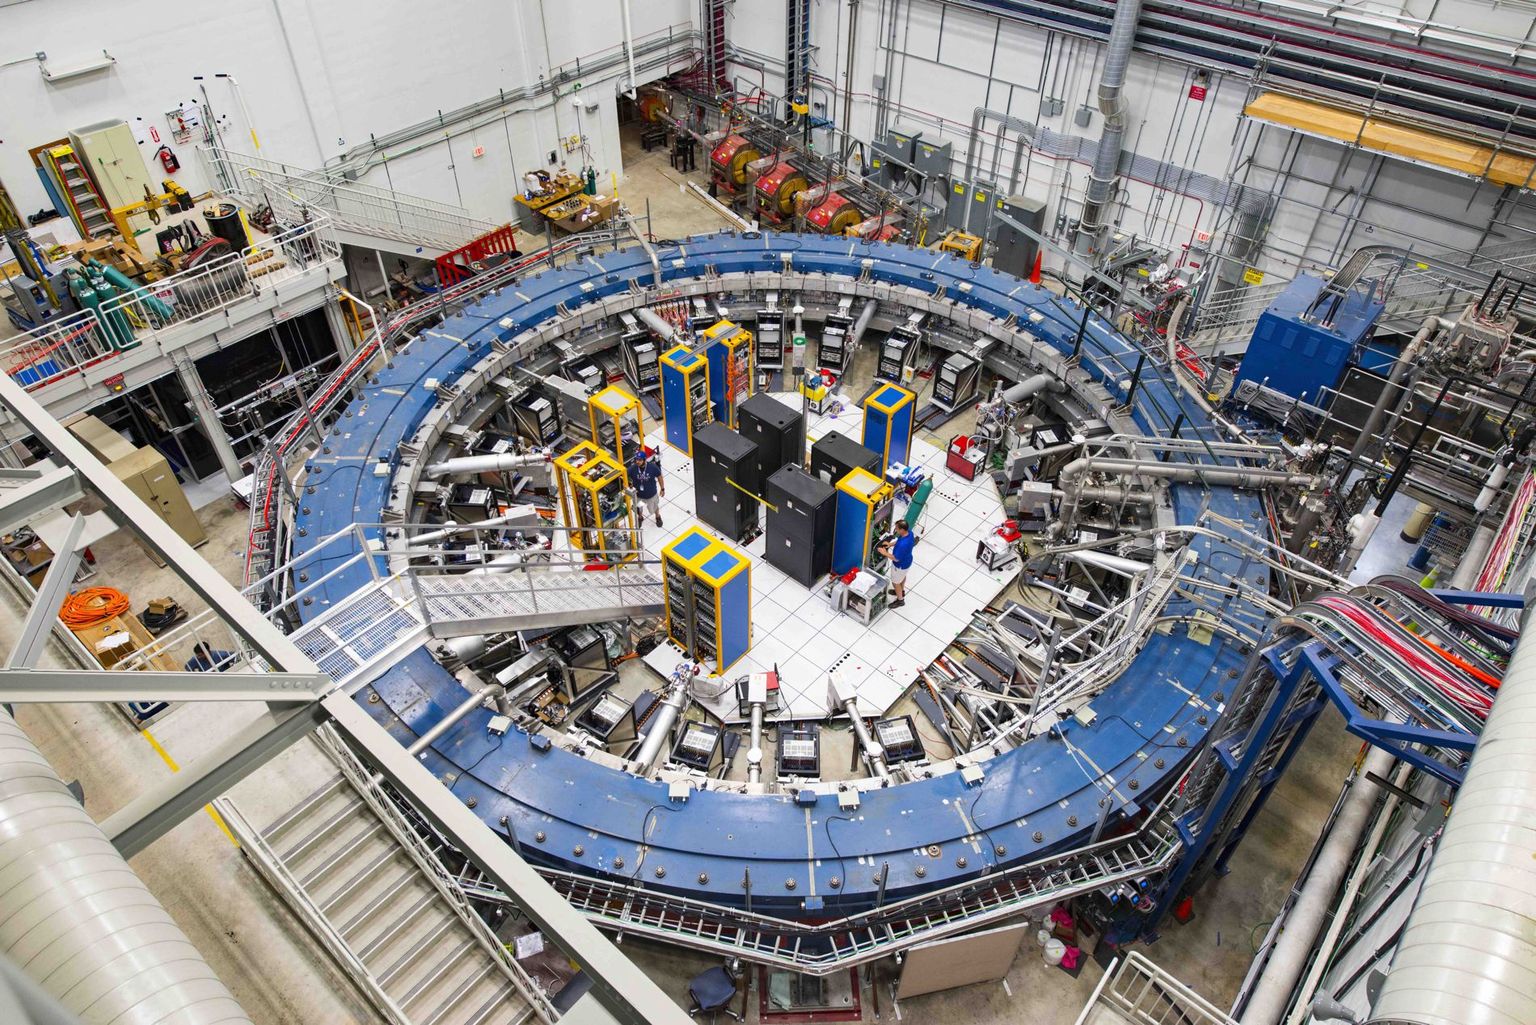 This ring magnet is part of the experiment used to precisely measure the magnetic dipole moment of muons at Fermilab near Chicago.